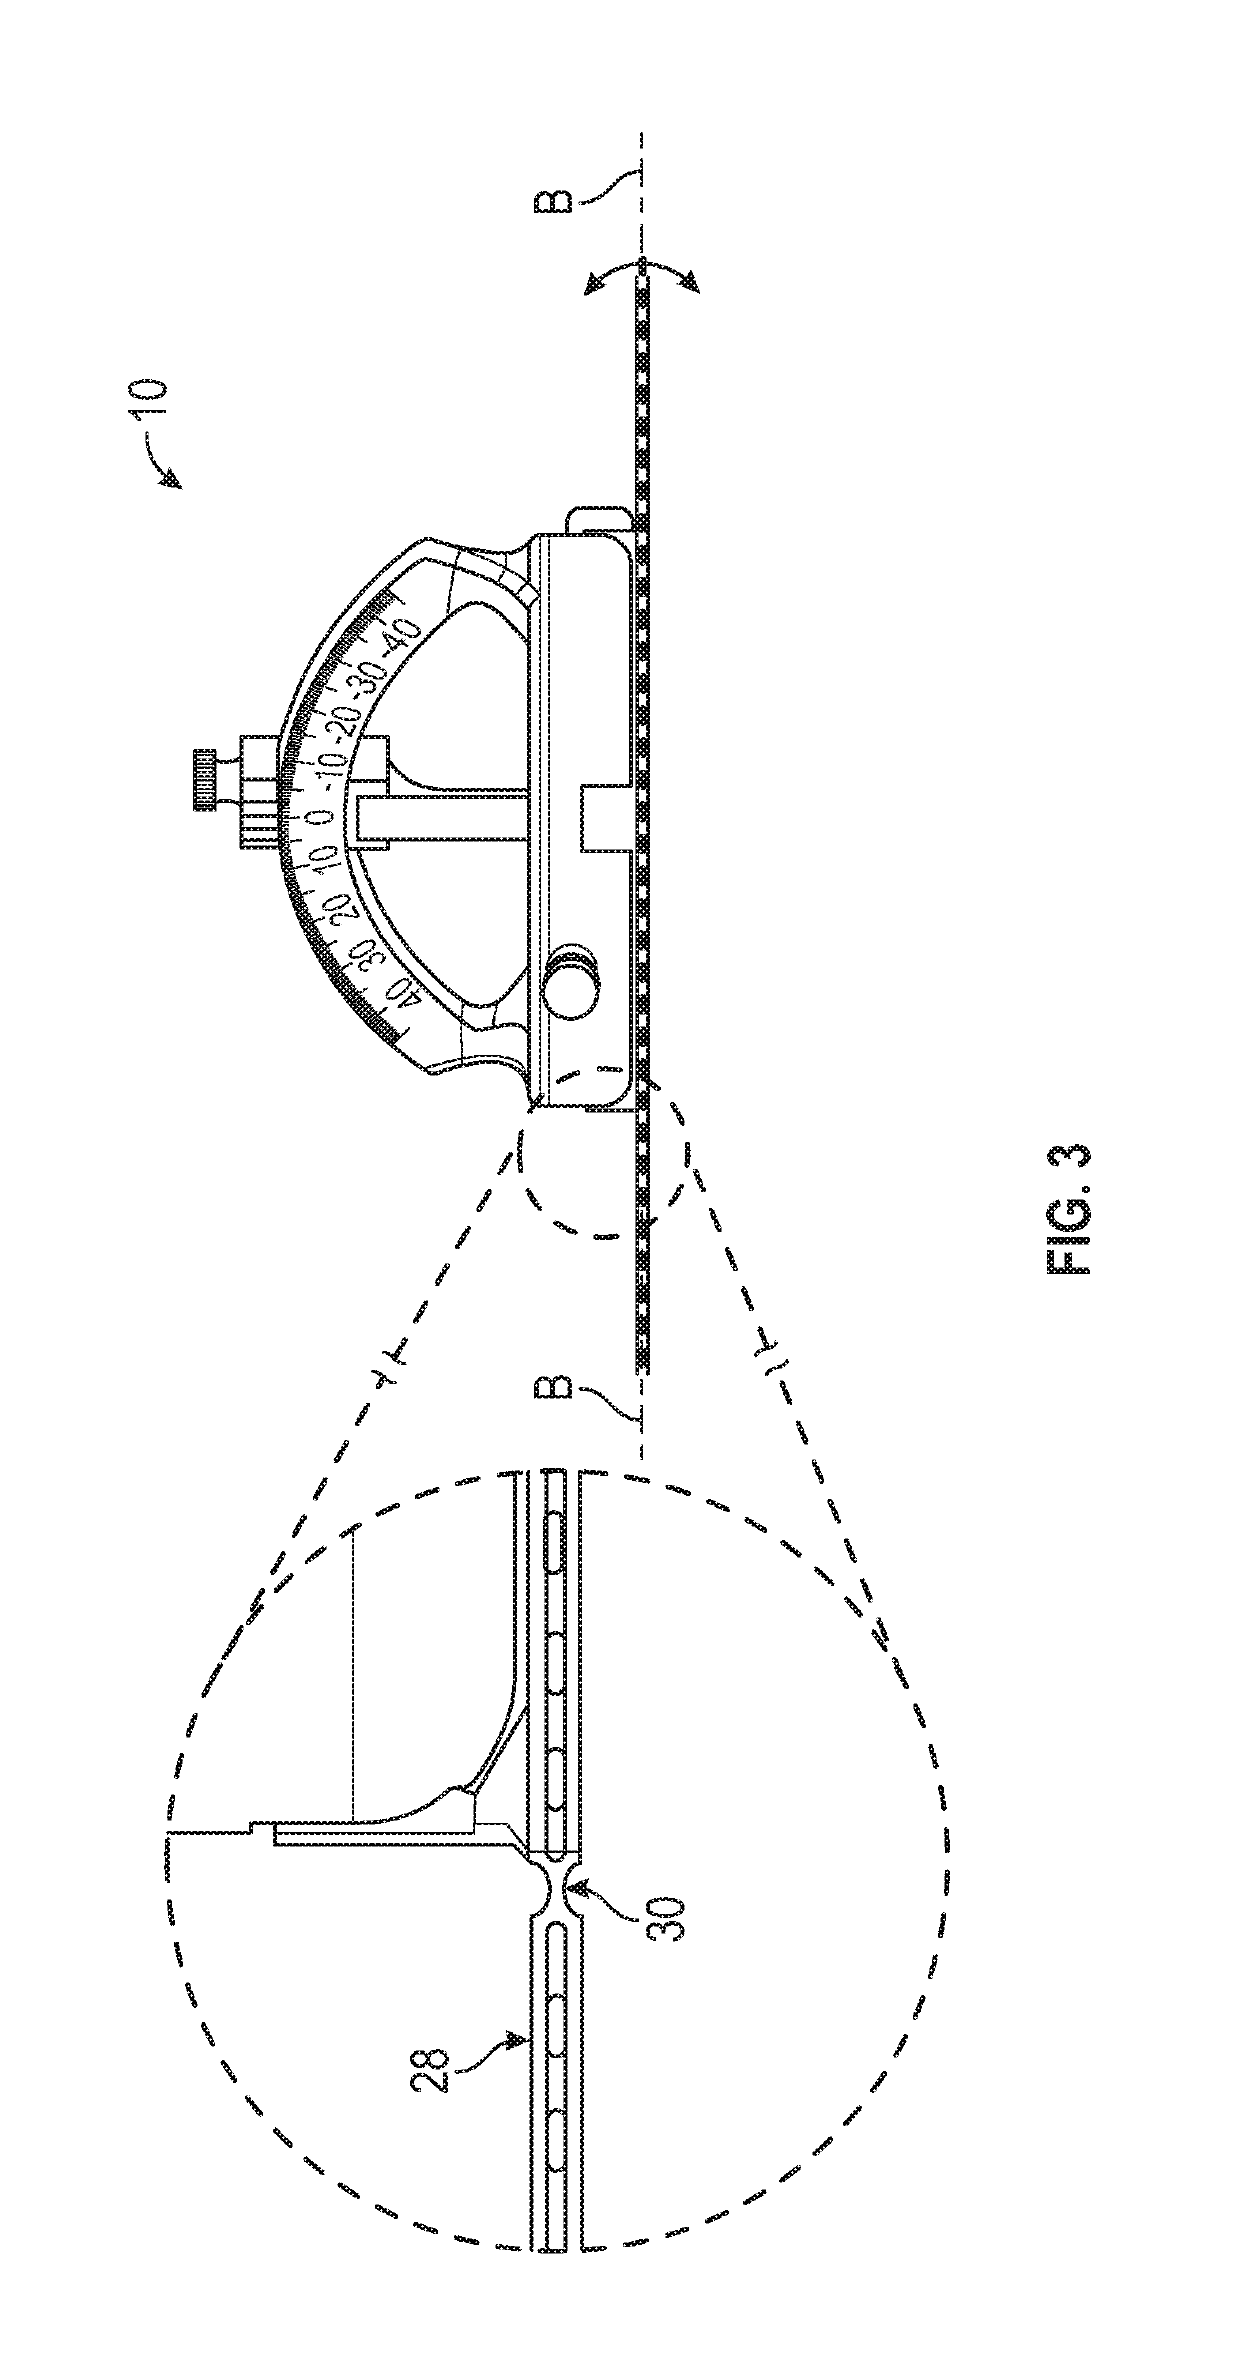 Method and apparatus for a medical guidance device